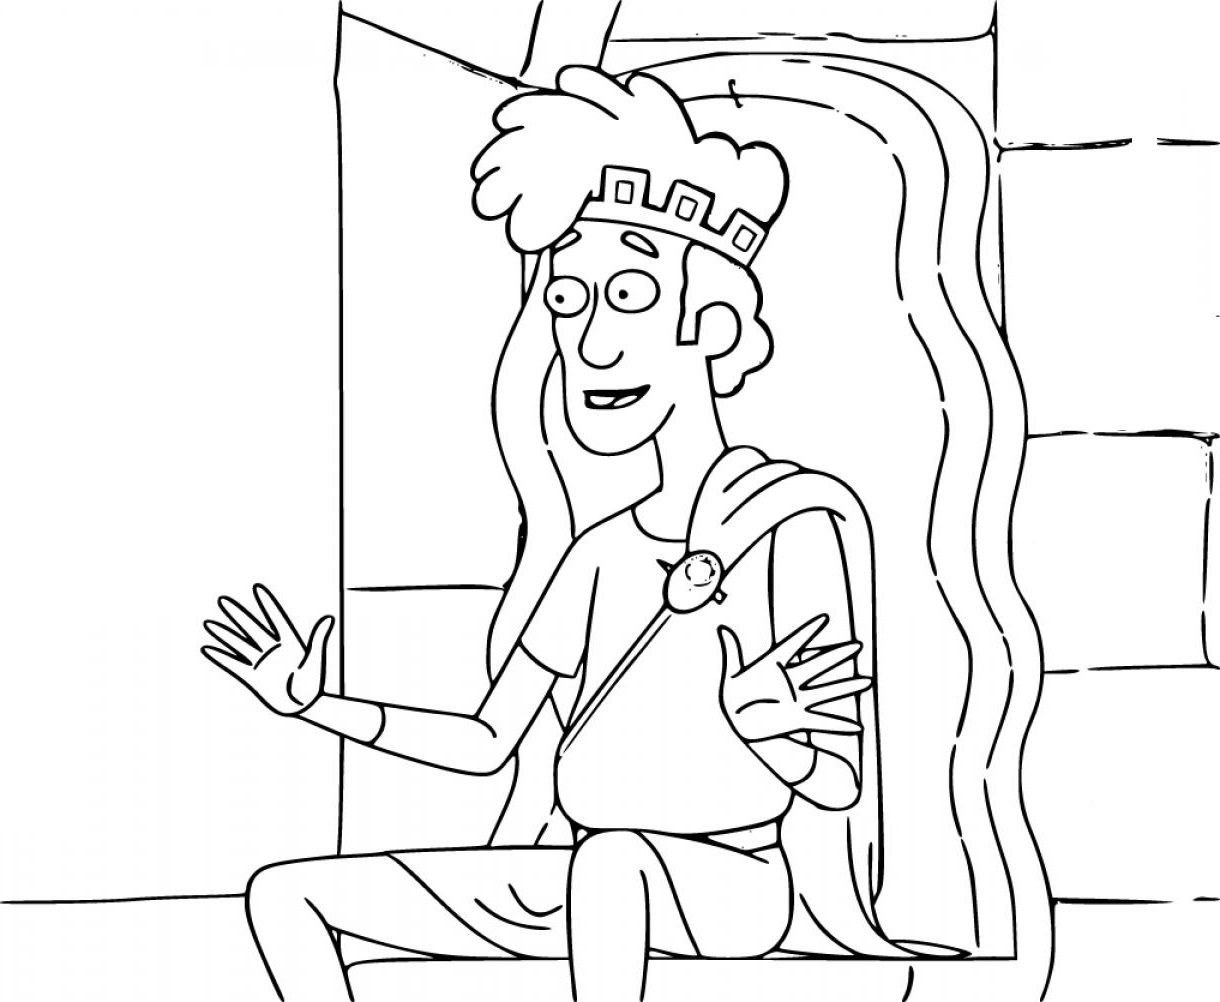 Printable Tyrannis surprised Coloring Page for kids.